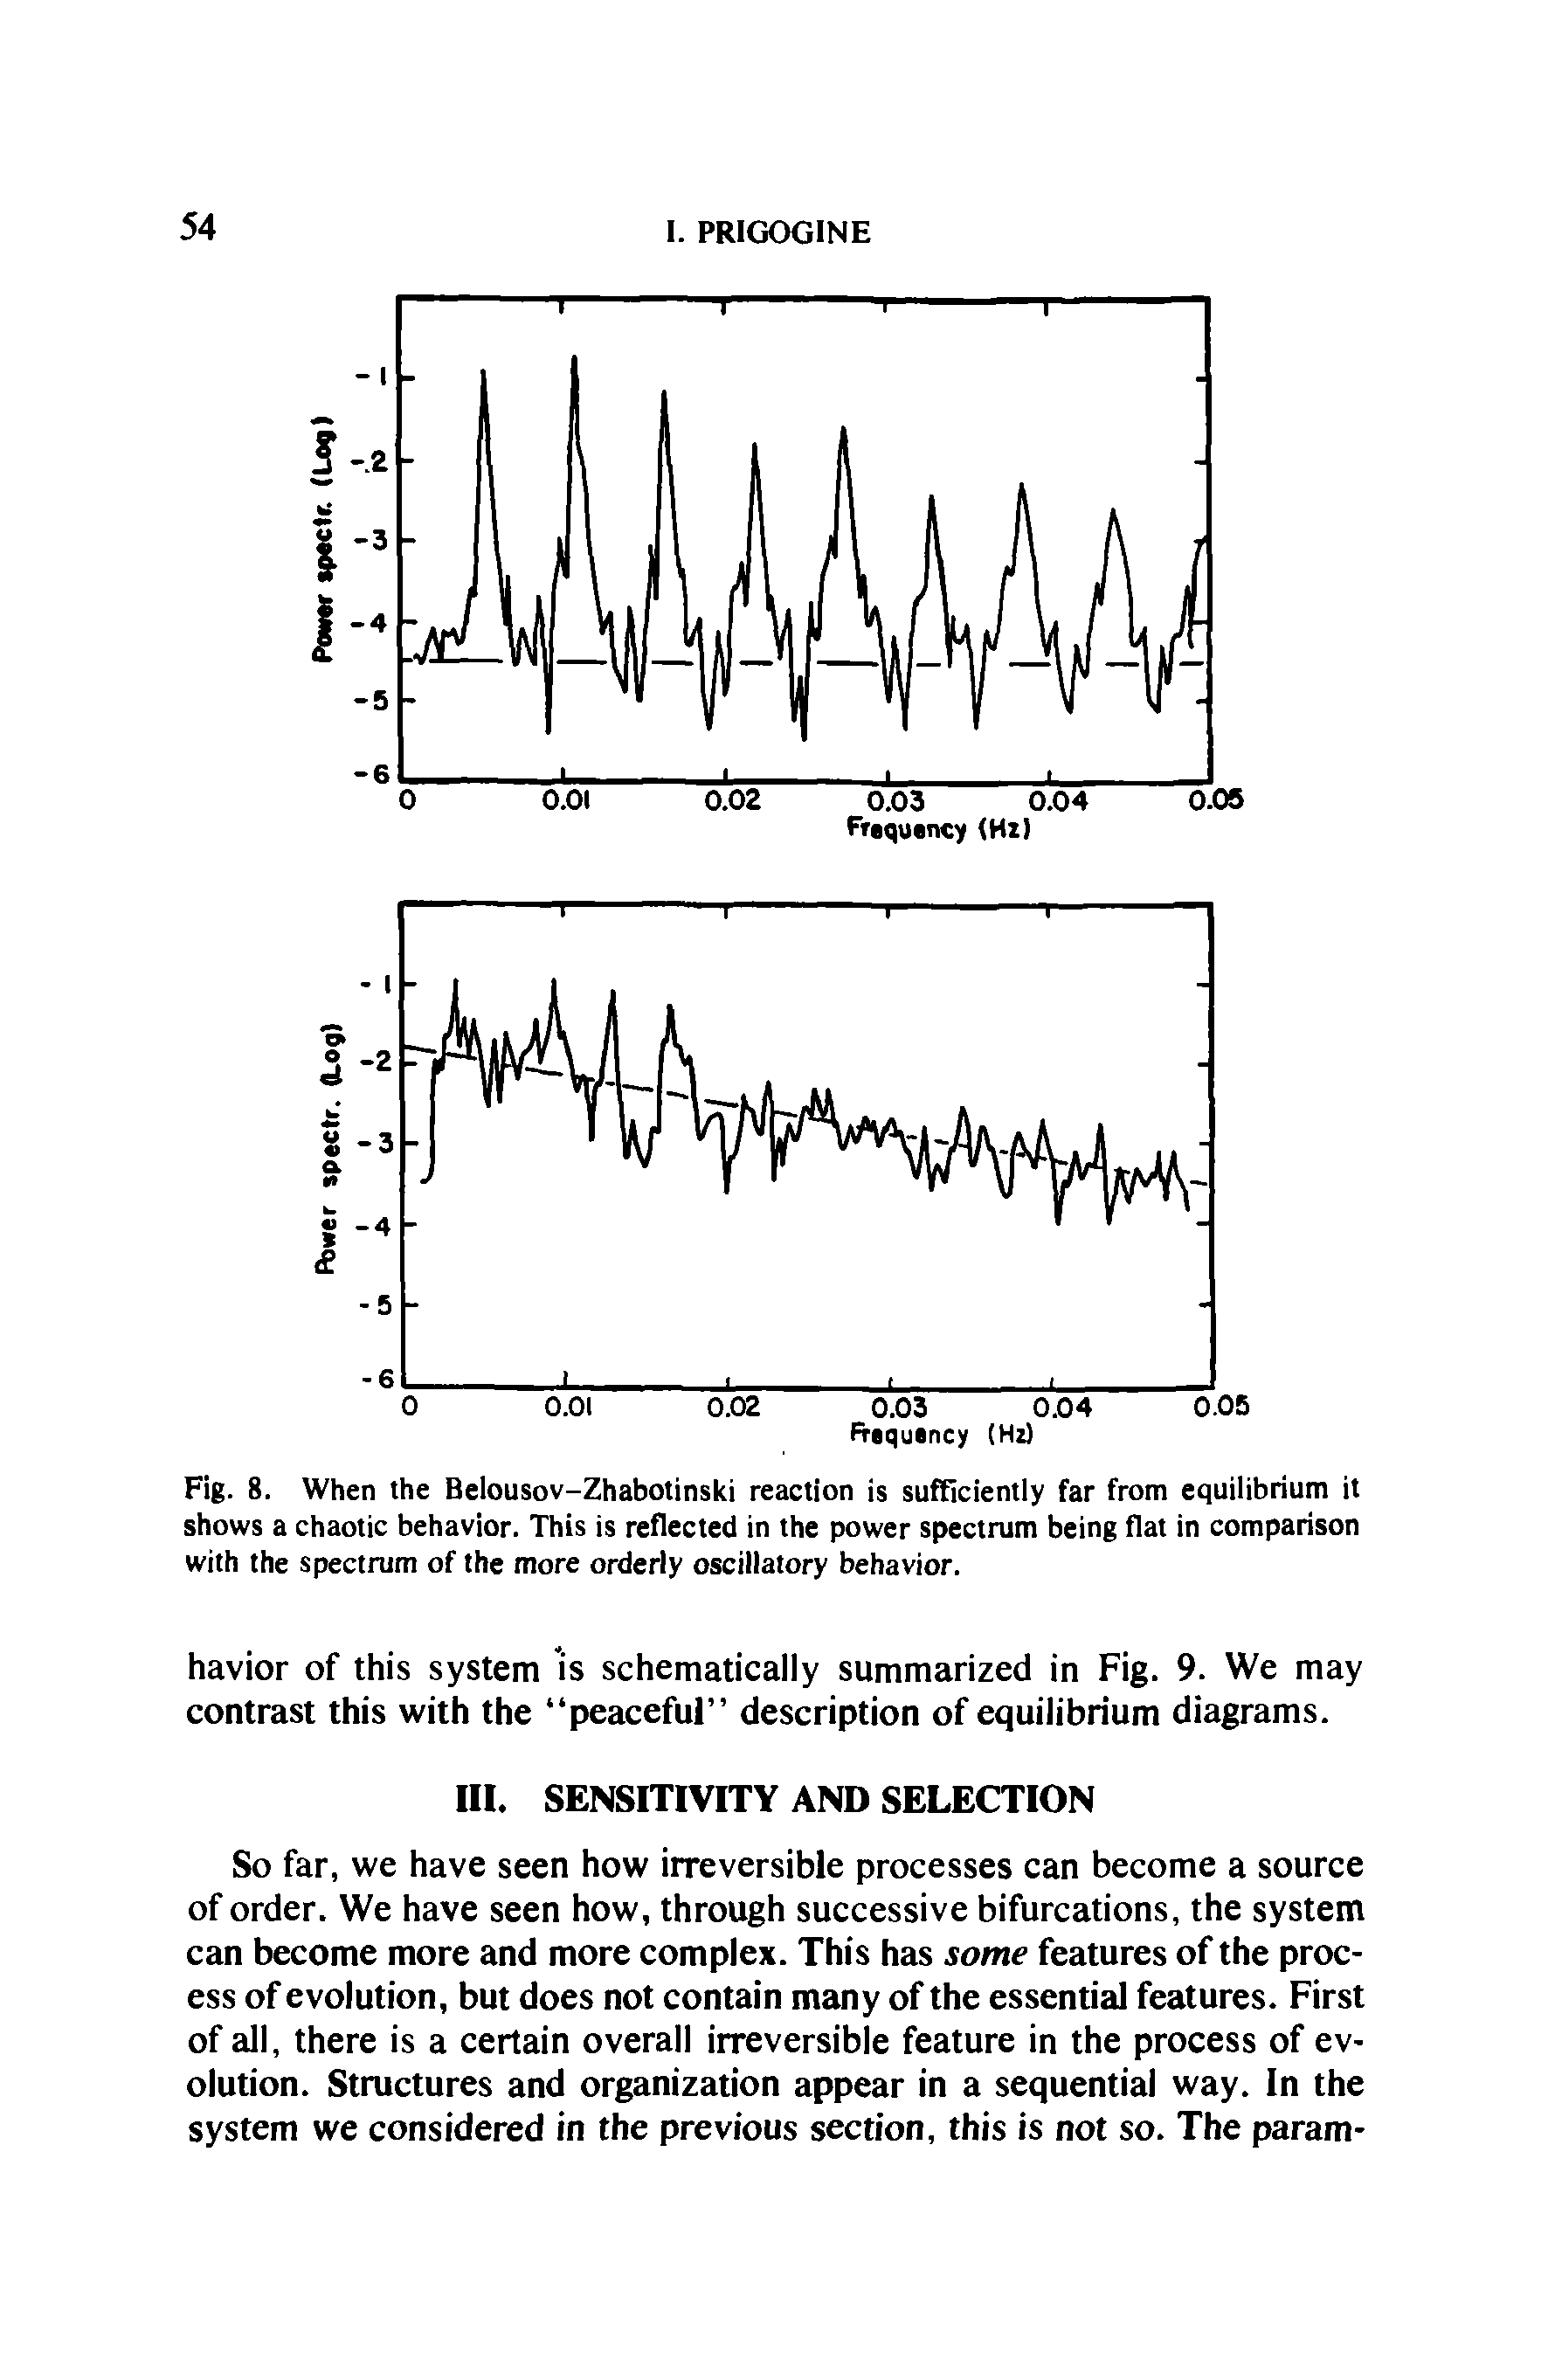 Fig. 8. When the Belousov-Zhabotinski reaction is sufficiently far from equilibrium it shows a chaotic behavior. This is reflected in the power spectrum being flat in comparison with the spectrum of the more orderly oscillatory behavior.